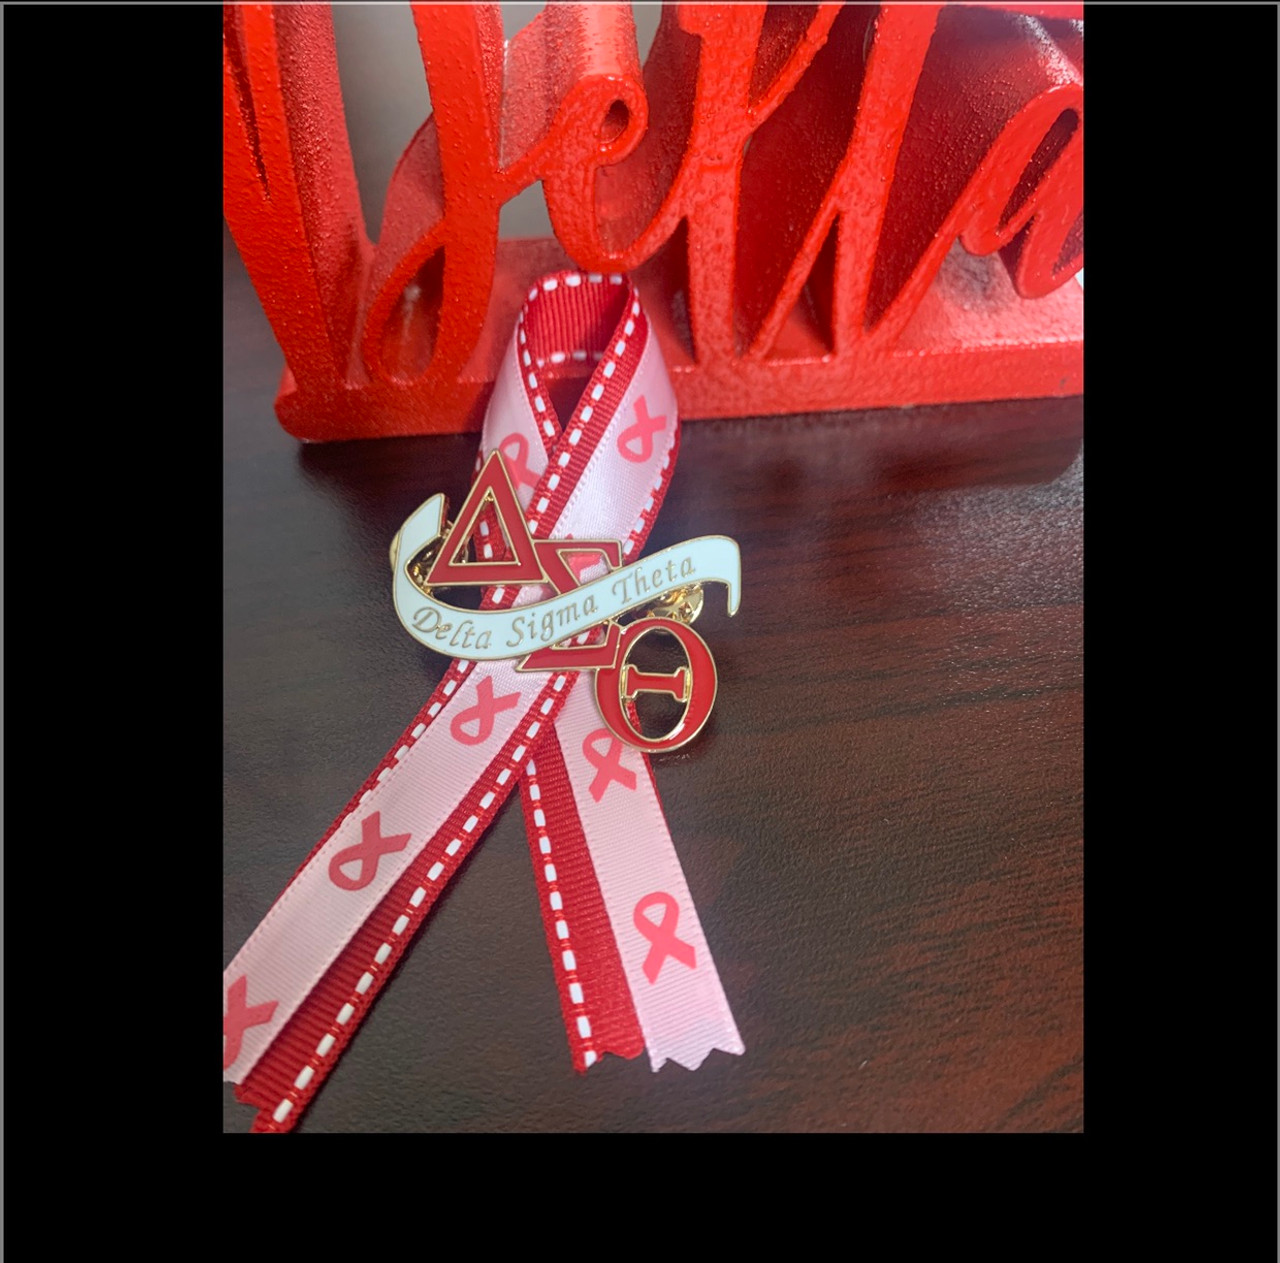 Red pin-striped and Pink Specialty BCA Ribbon - Delta Breast cancer  awareness pin - red and pink B C Awareness ribbon - Delta Sigma Theta pin 